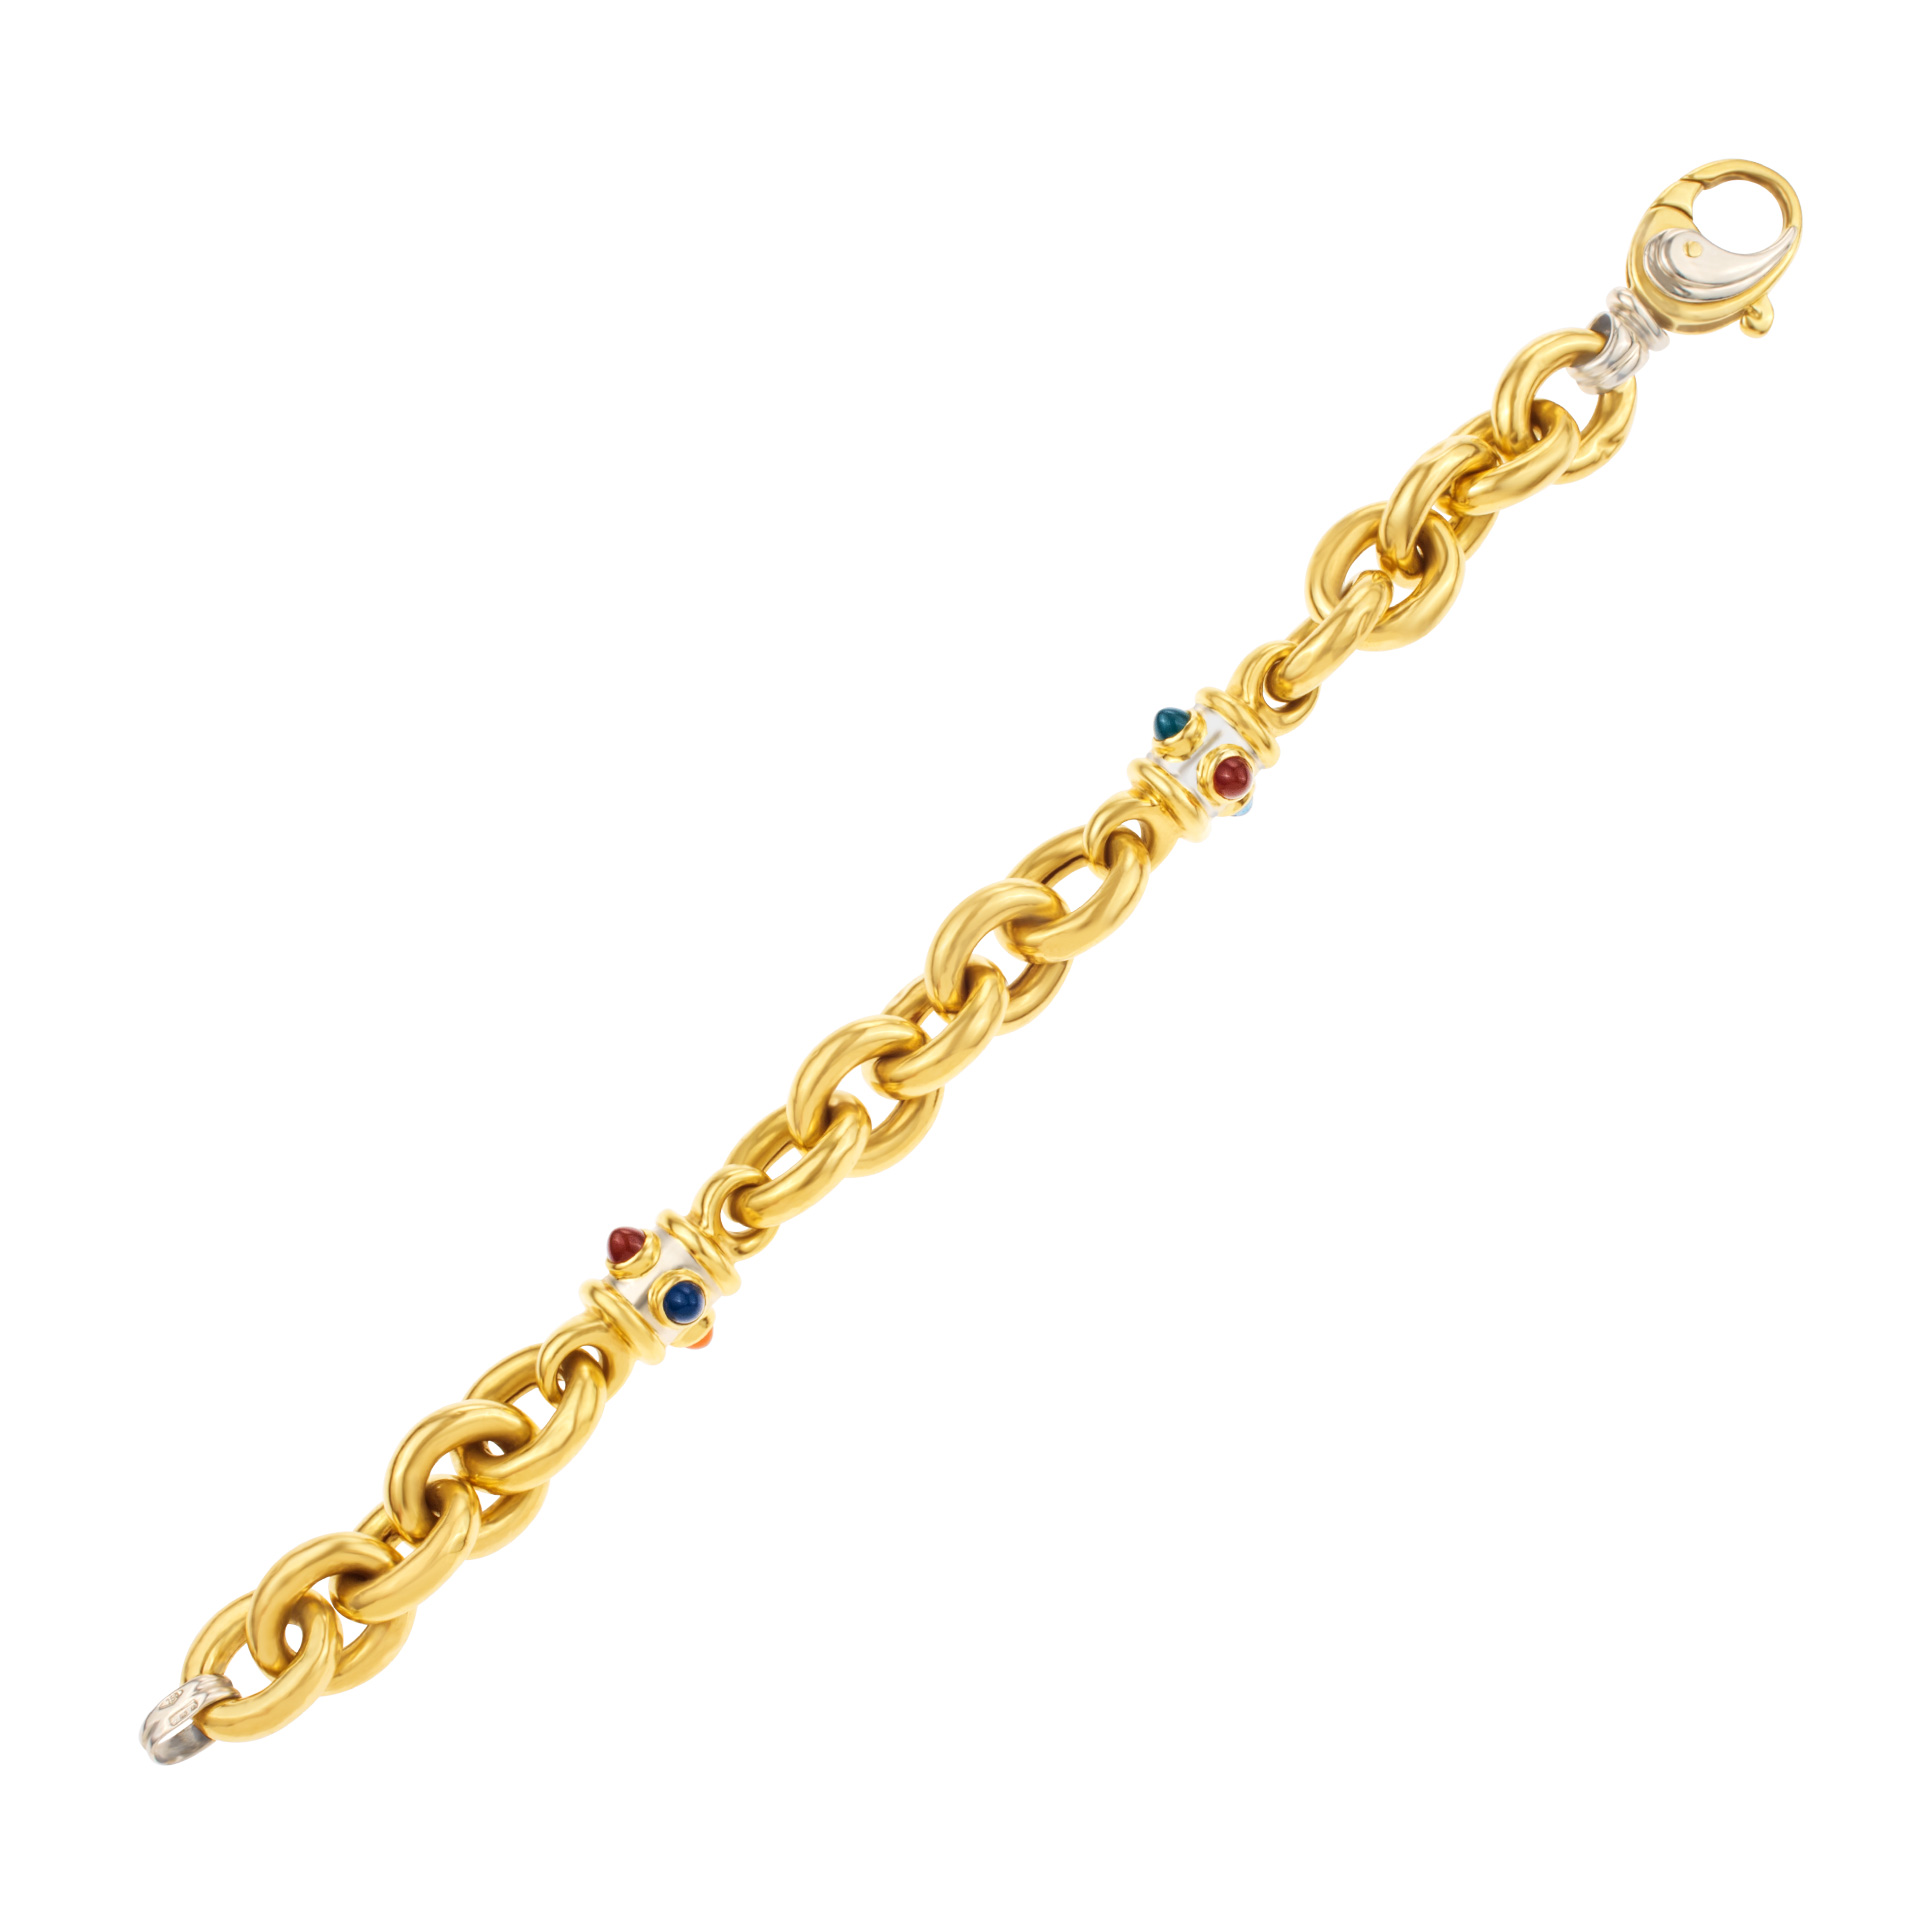 Bracelet in 18k with cabochon stones